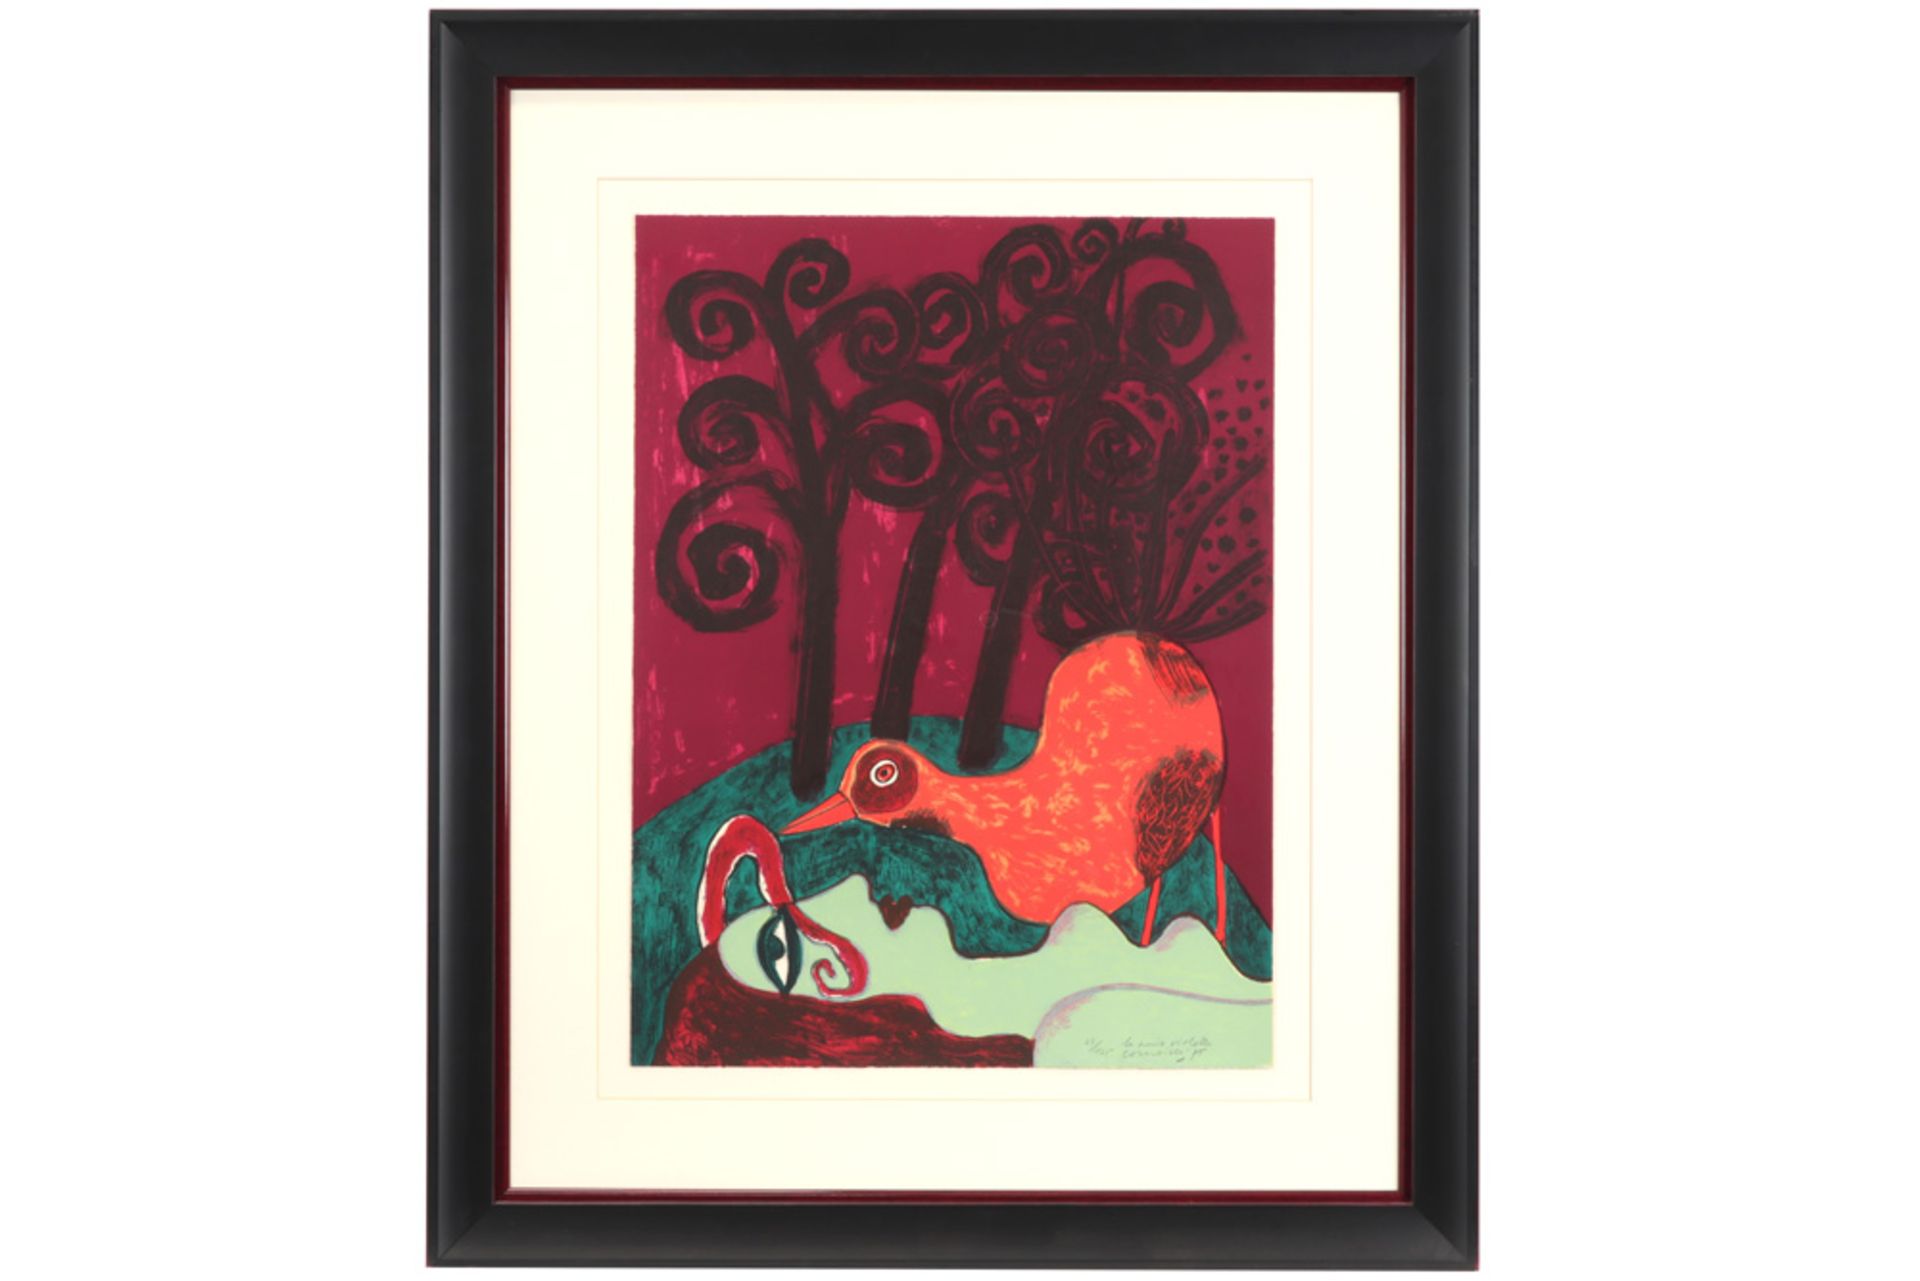 Corneille signed lithograph printed in colors - dated (19)75 ||CORNEILLE (1922 - 2010) (1922 - 2010) - Image 3 of 3